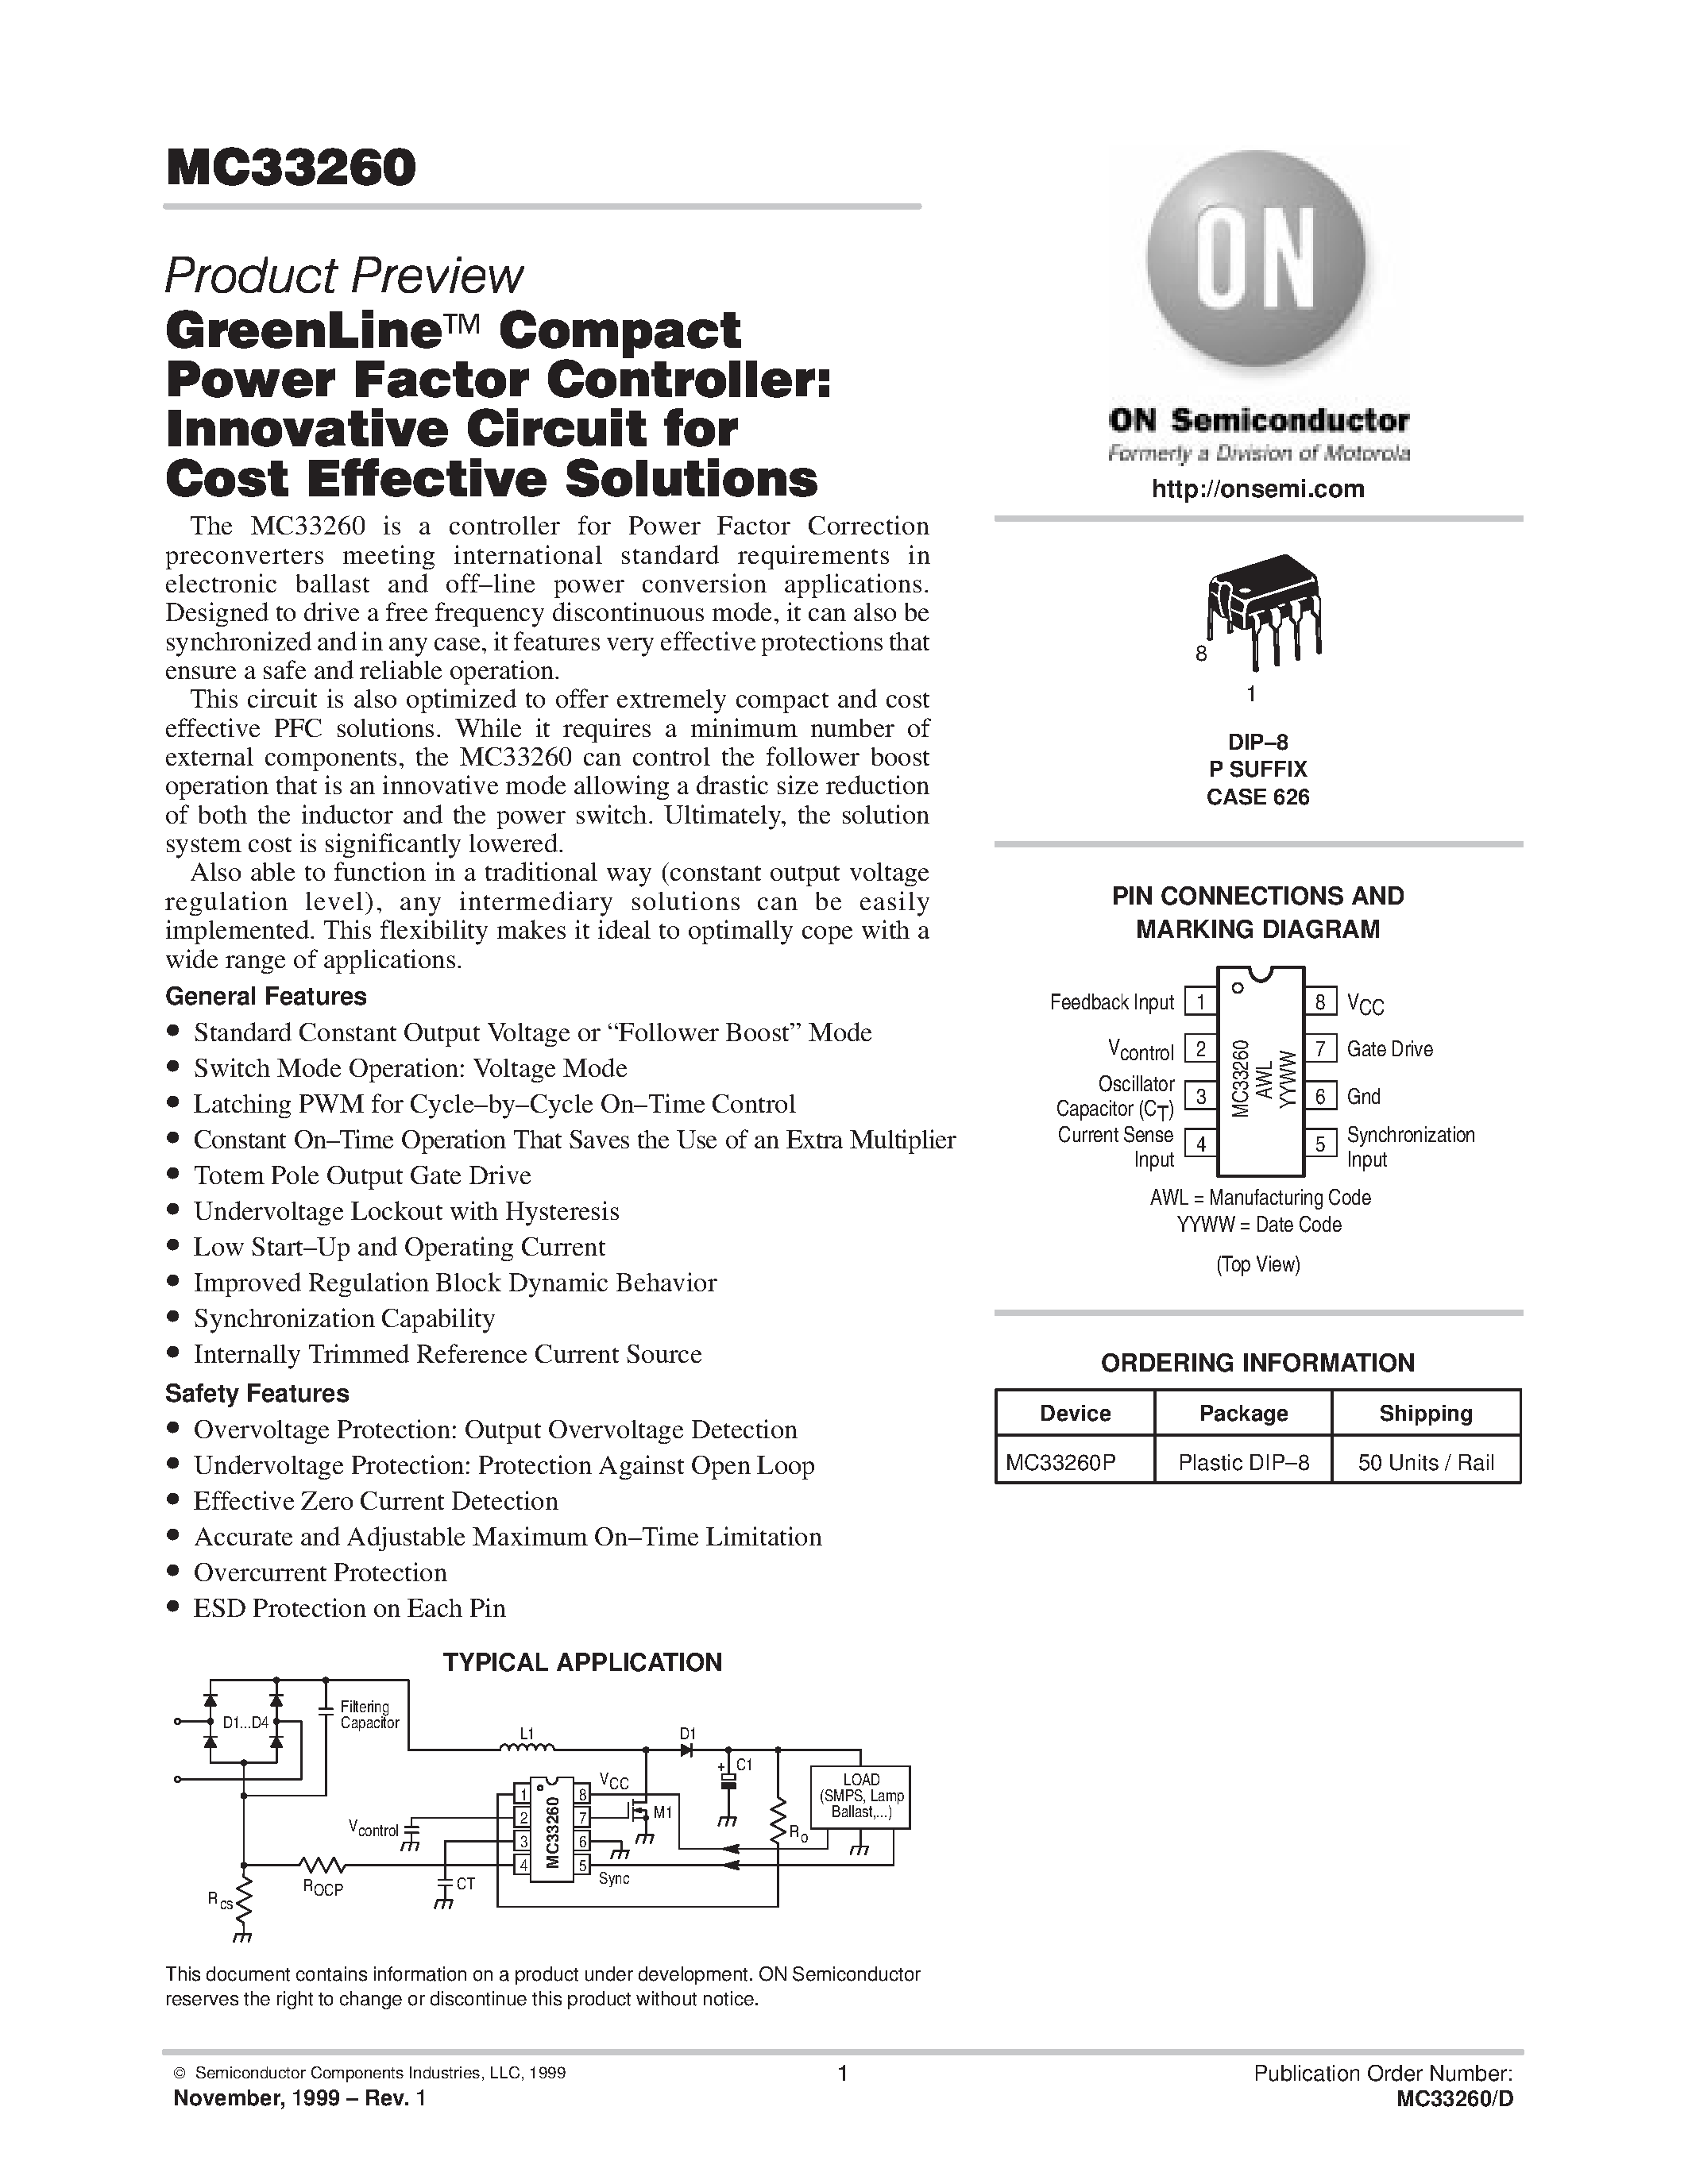 Datasheet MC33260 - GreenLine Compact Power Factor Controller page 1